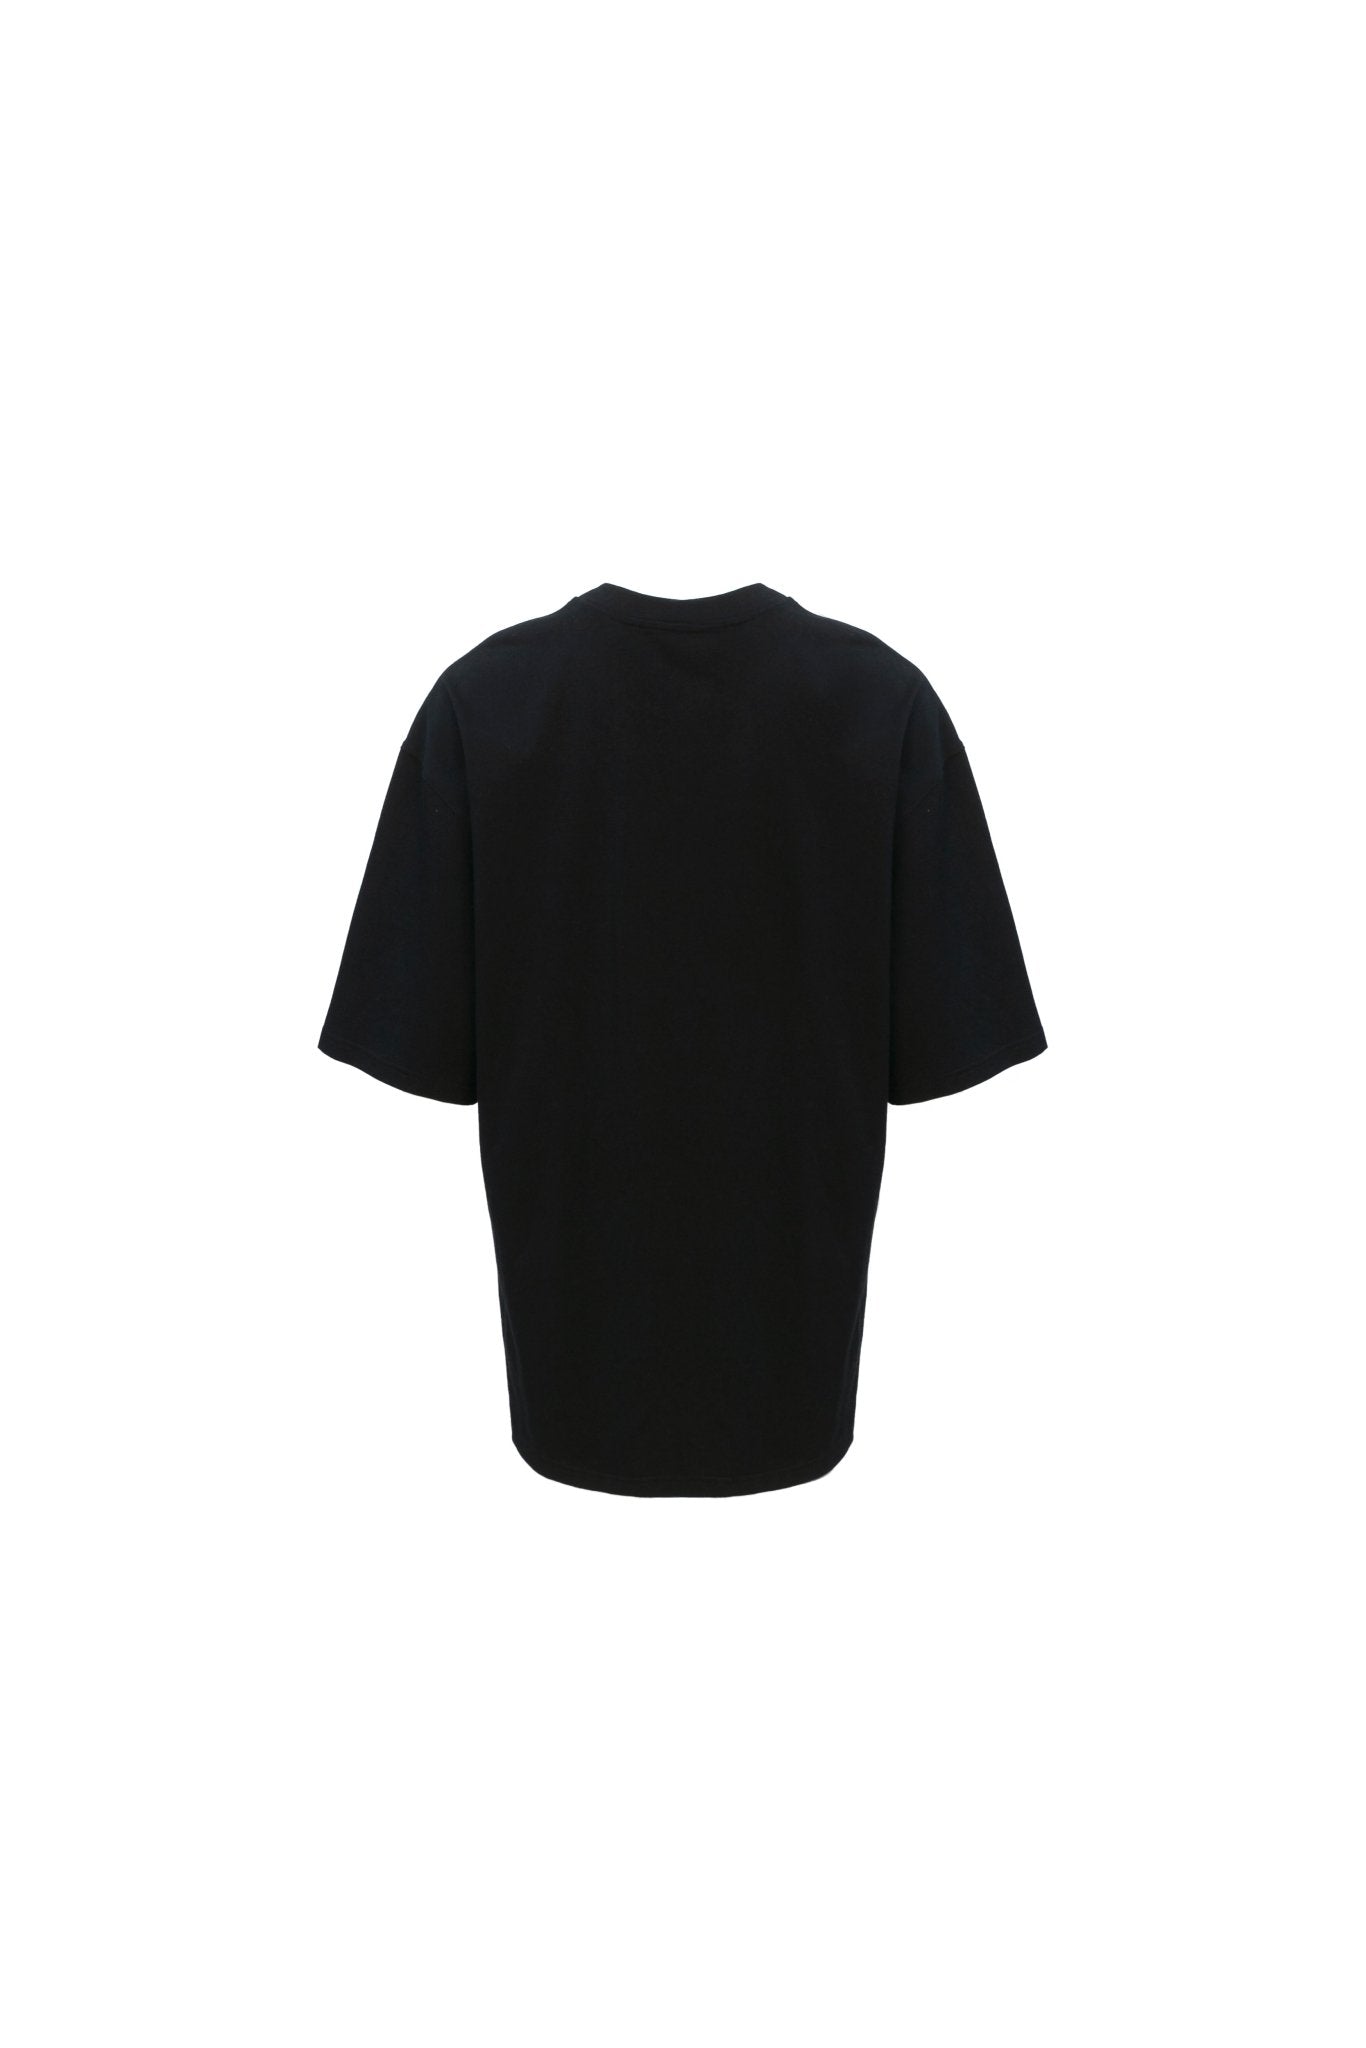 ANN ANDELMAN Jelly Letter T-shirt Black | MADA IN CHINA